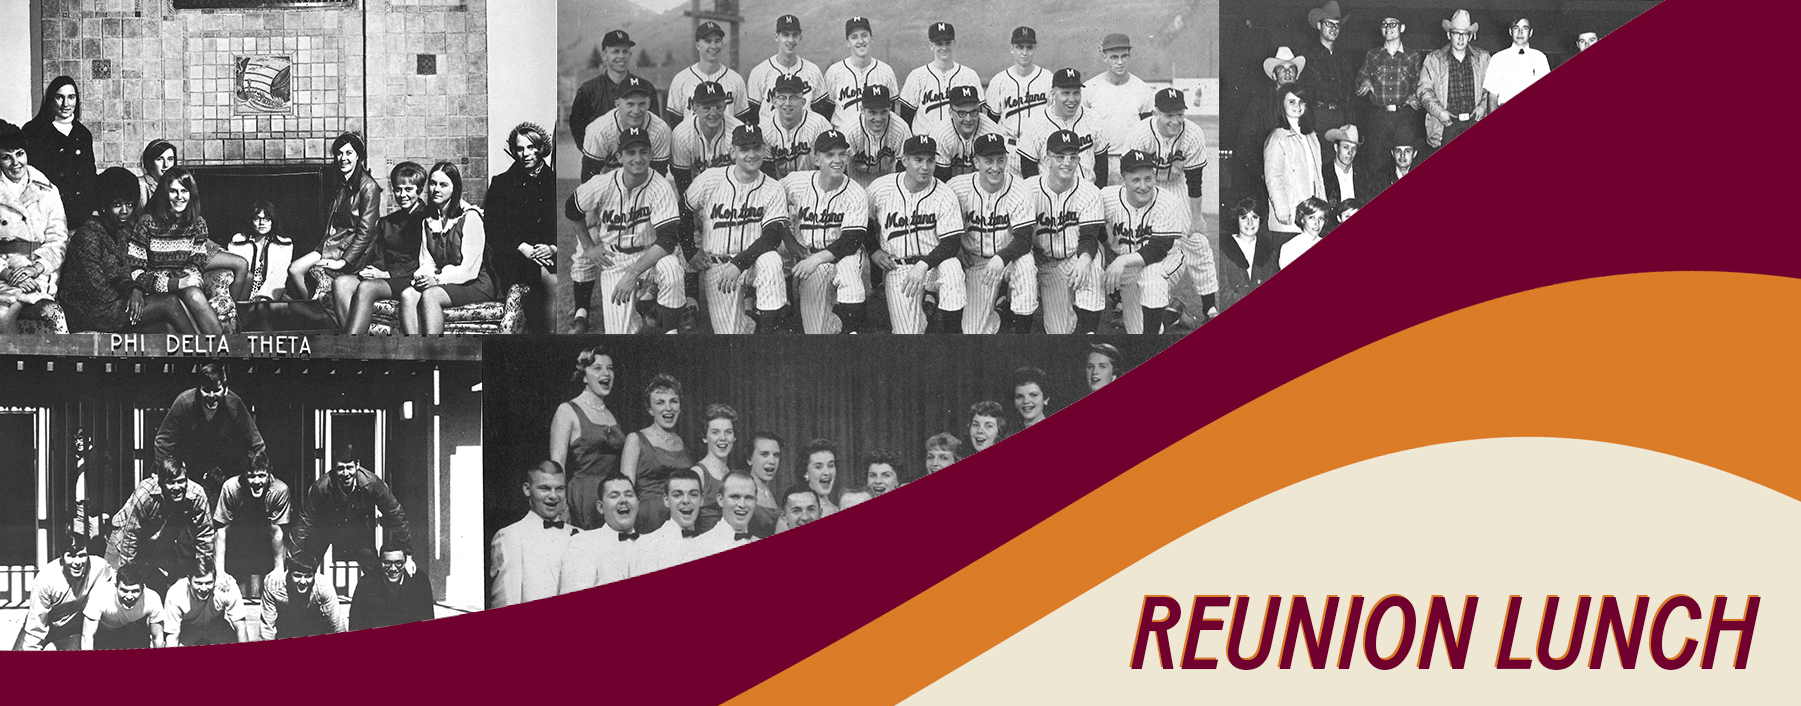 Header feature historic photos from the UM Archives and text that reads "Reunion Lunch"